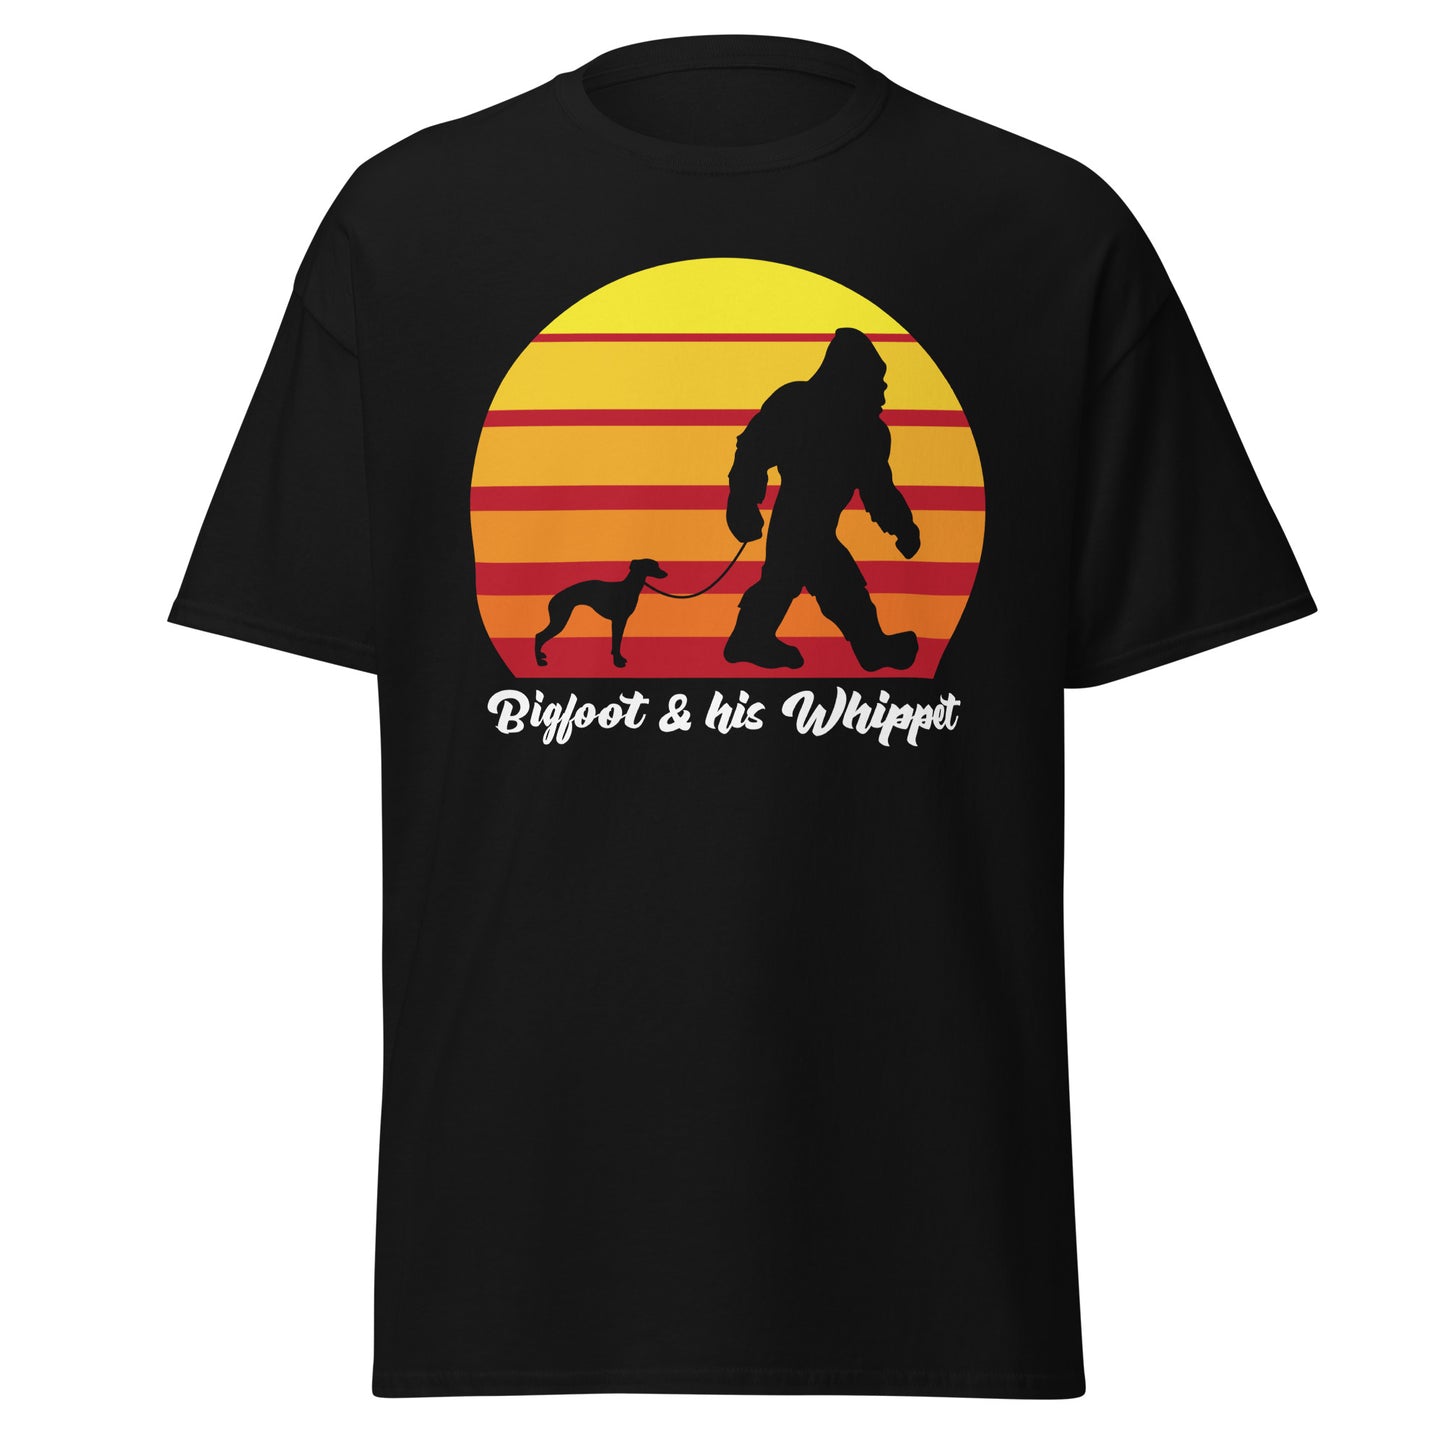 Bigfoot and his Staffordshire Whippet men’s black t-shirt by Dog Artistry.